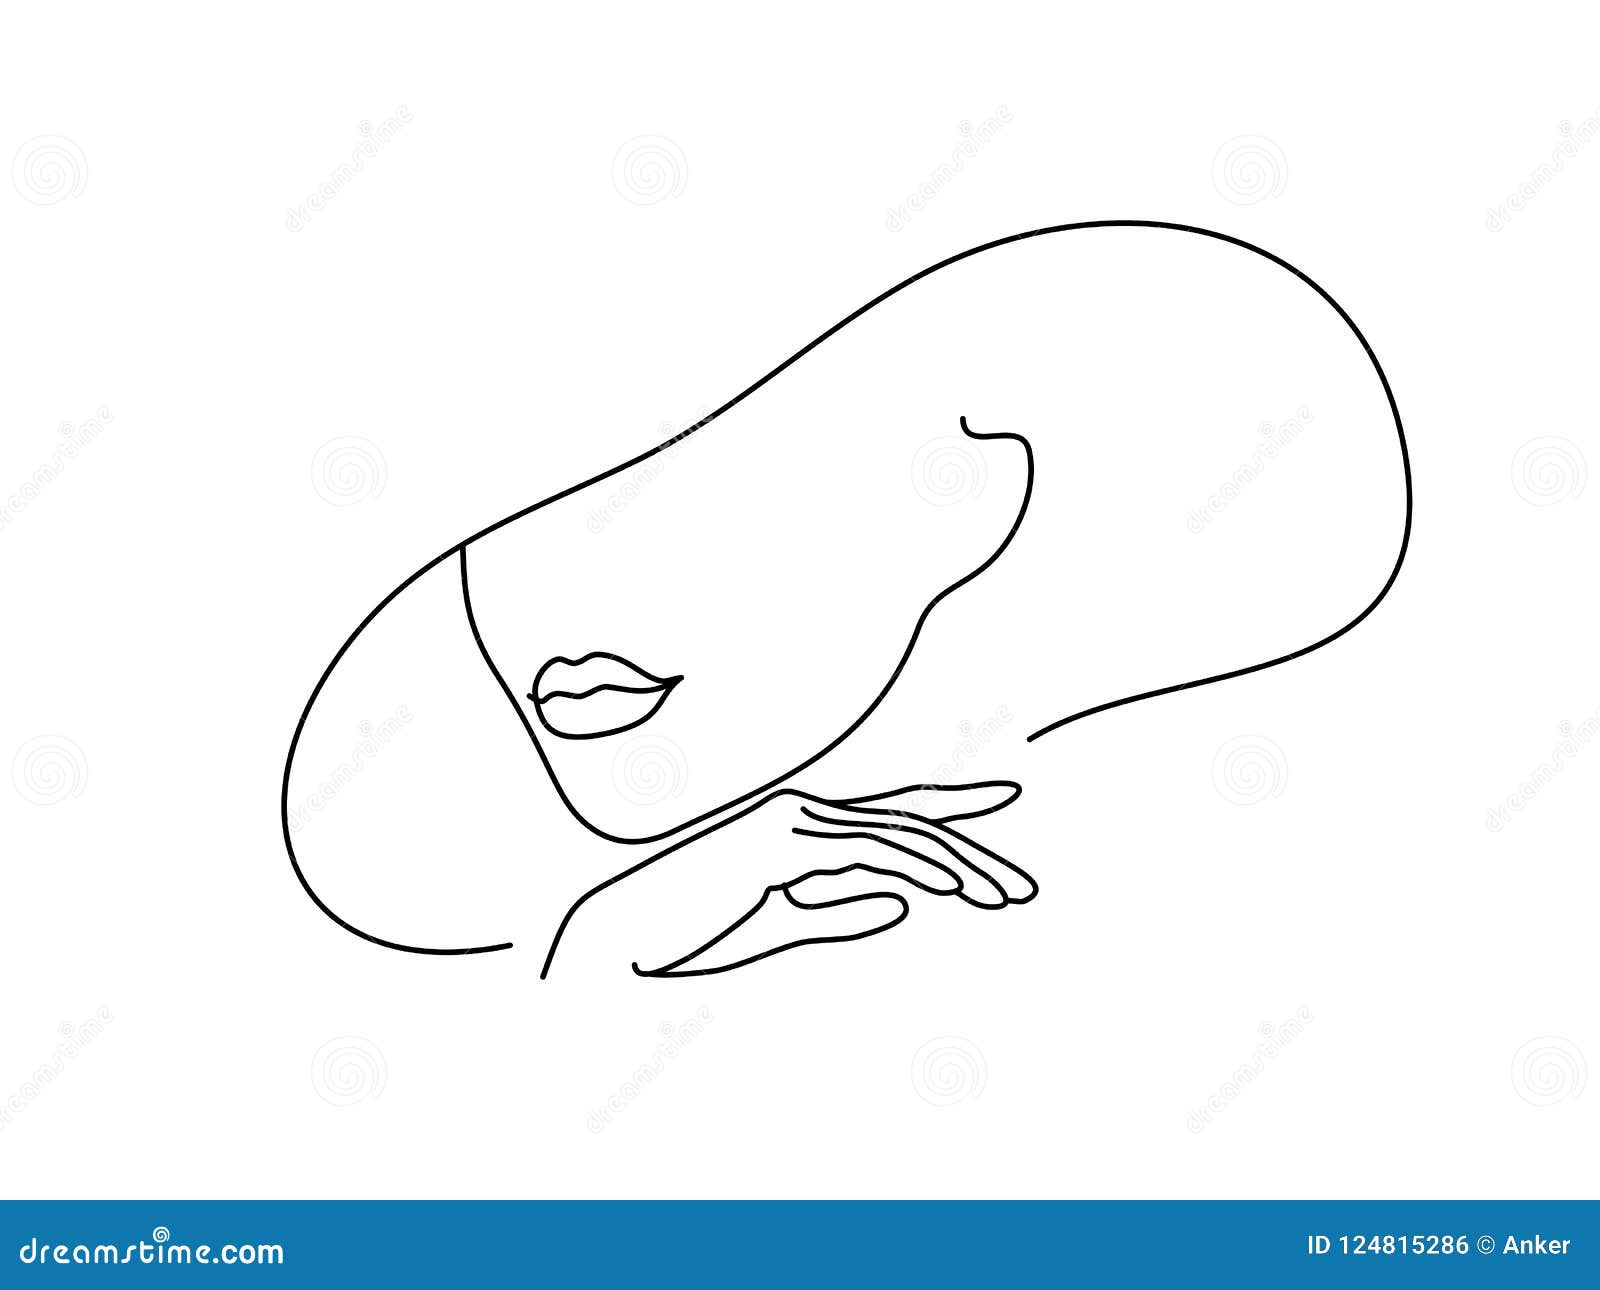 line drawing art. woman face with hand